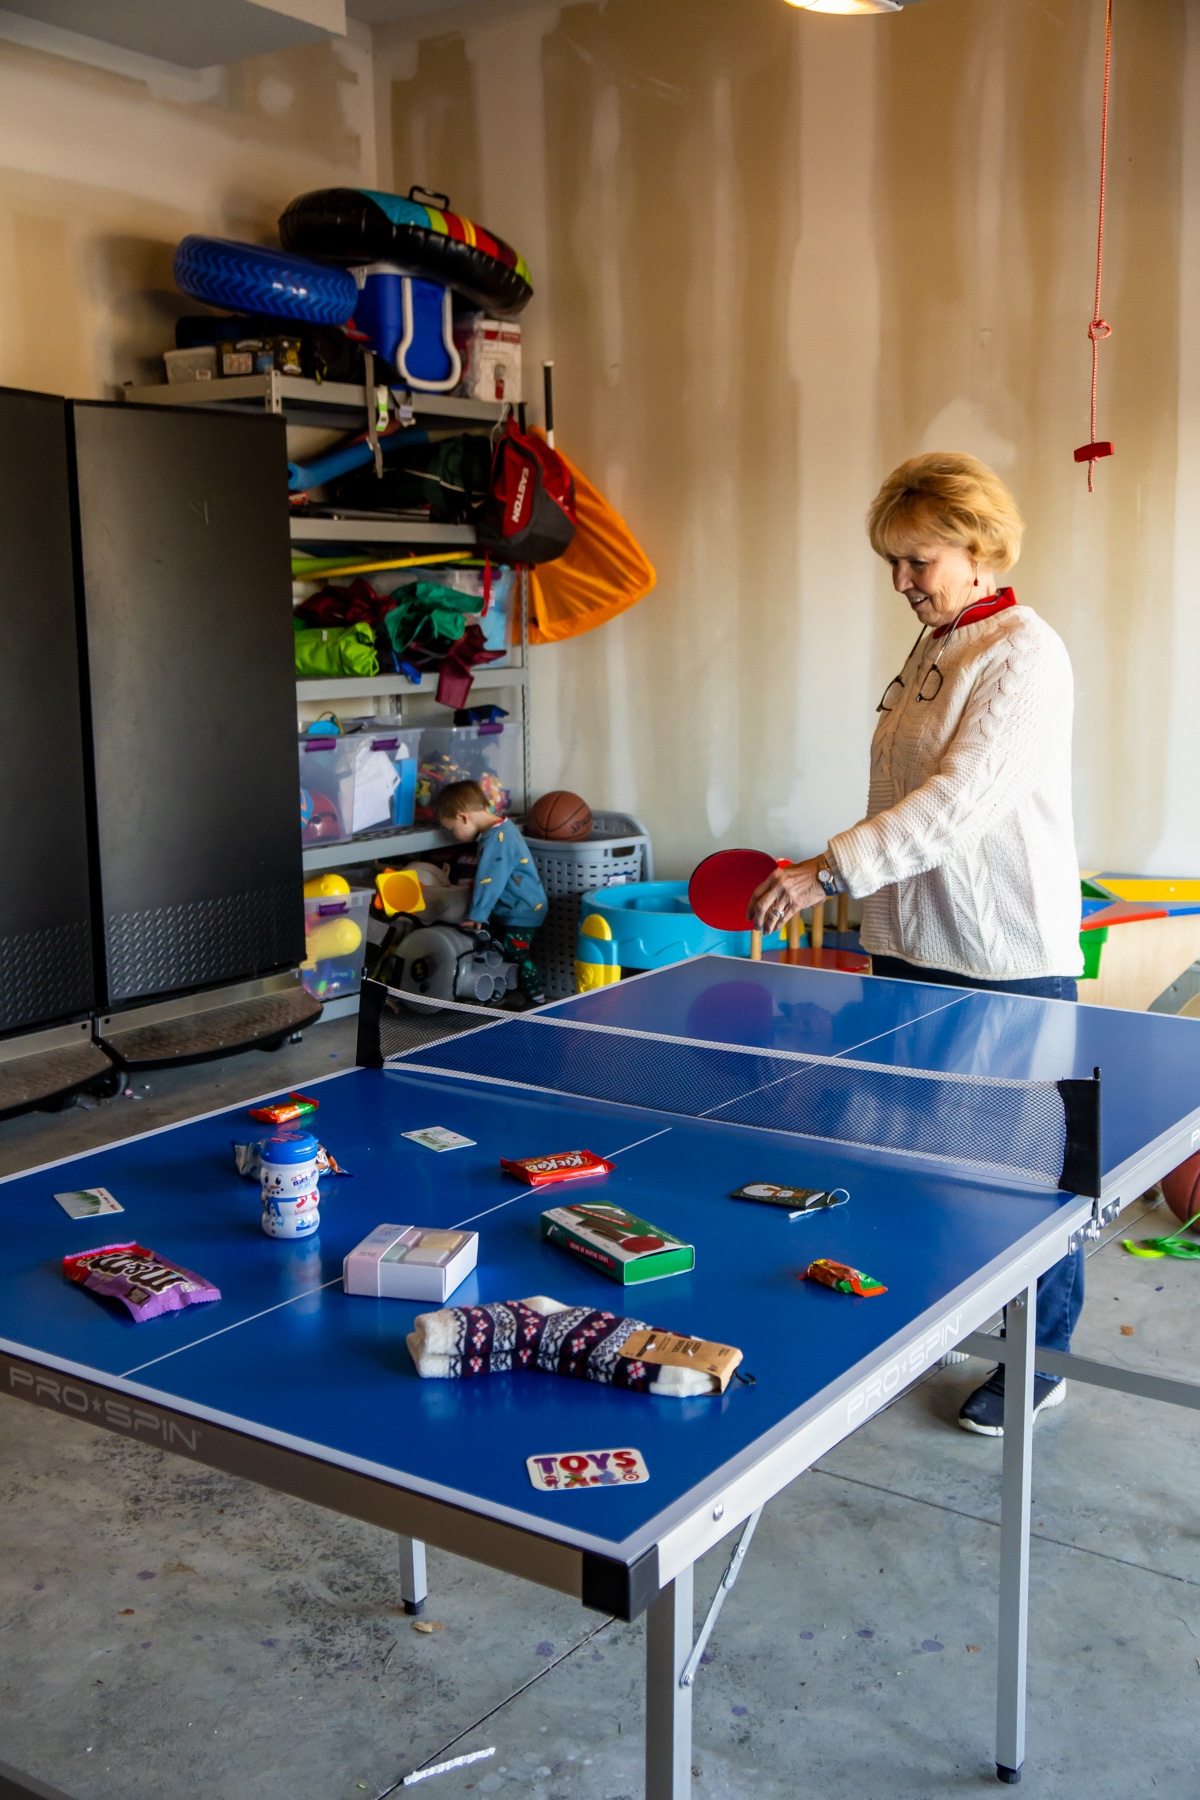 Fun Ping Pong Games for the Entire Family - Play Party Plan